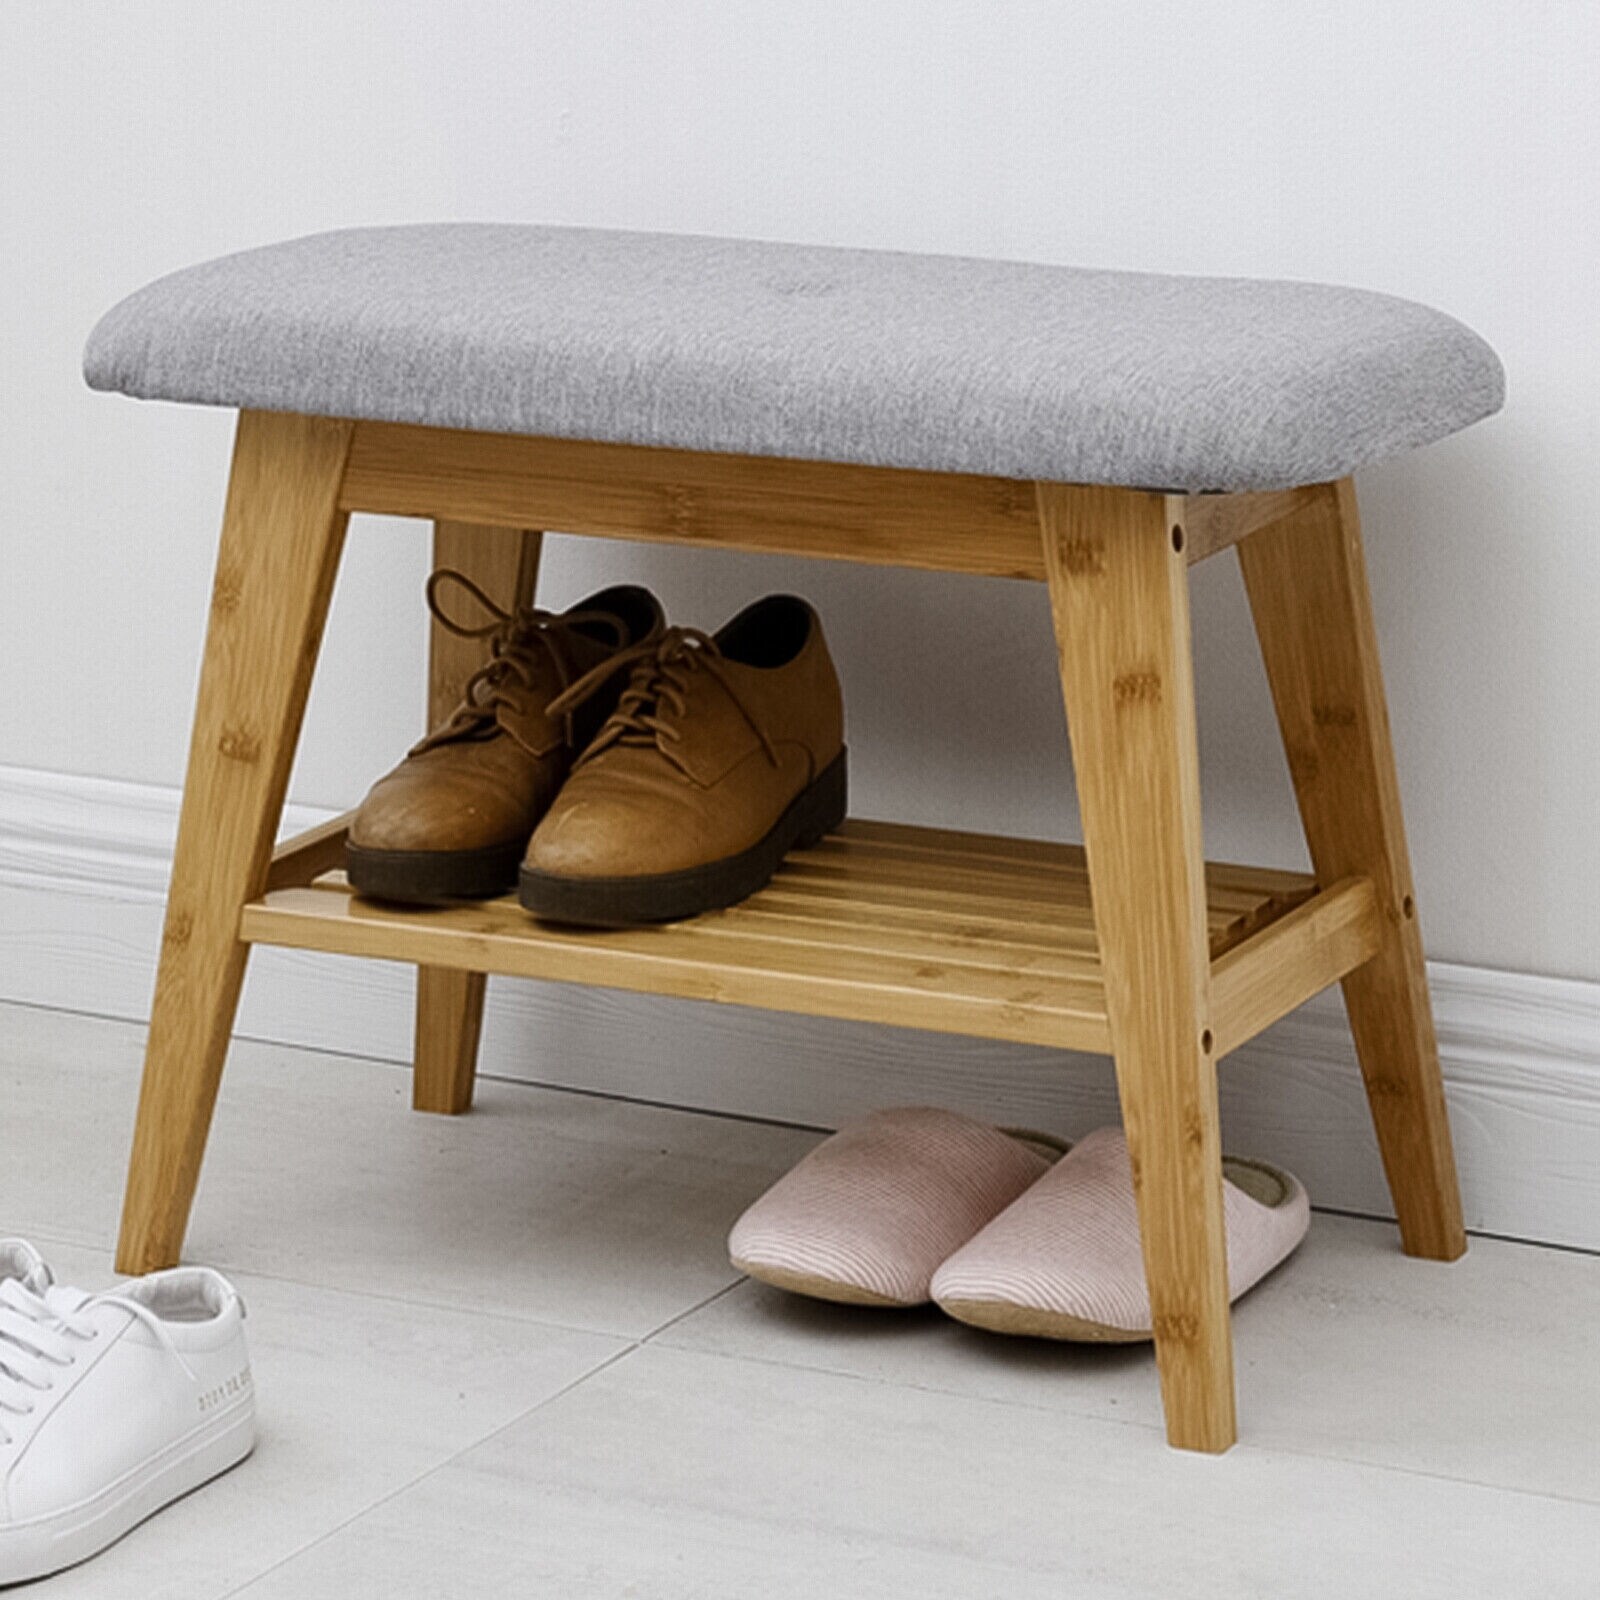 https://ak1.ostkcdn.com/images/products/is/images/direct/8cb3897df986ca4b0e7b37647c715cd8921f7b84/Bamboo-Entryway-Shoe-Rack-Bench-with-Storage-Shelf.jpg